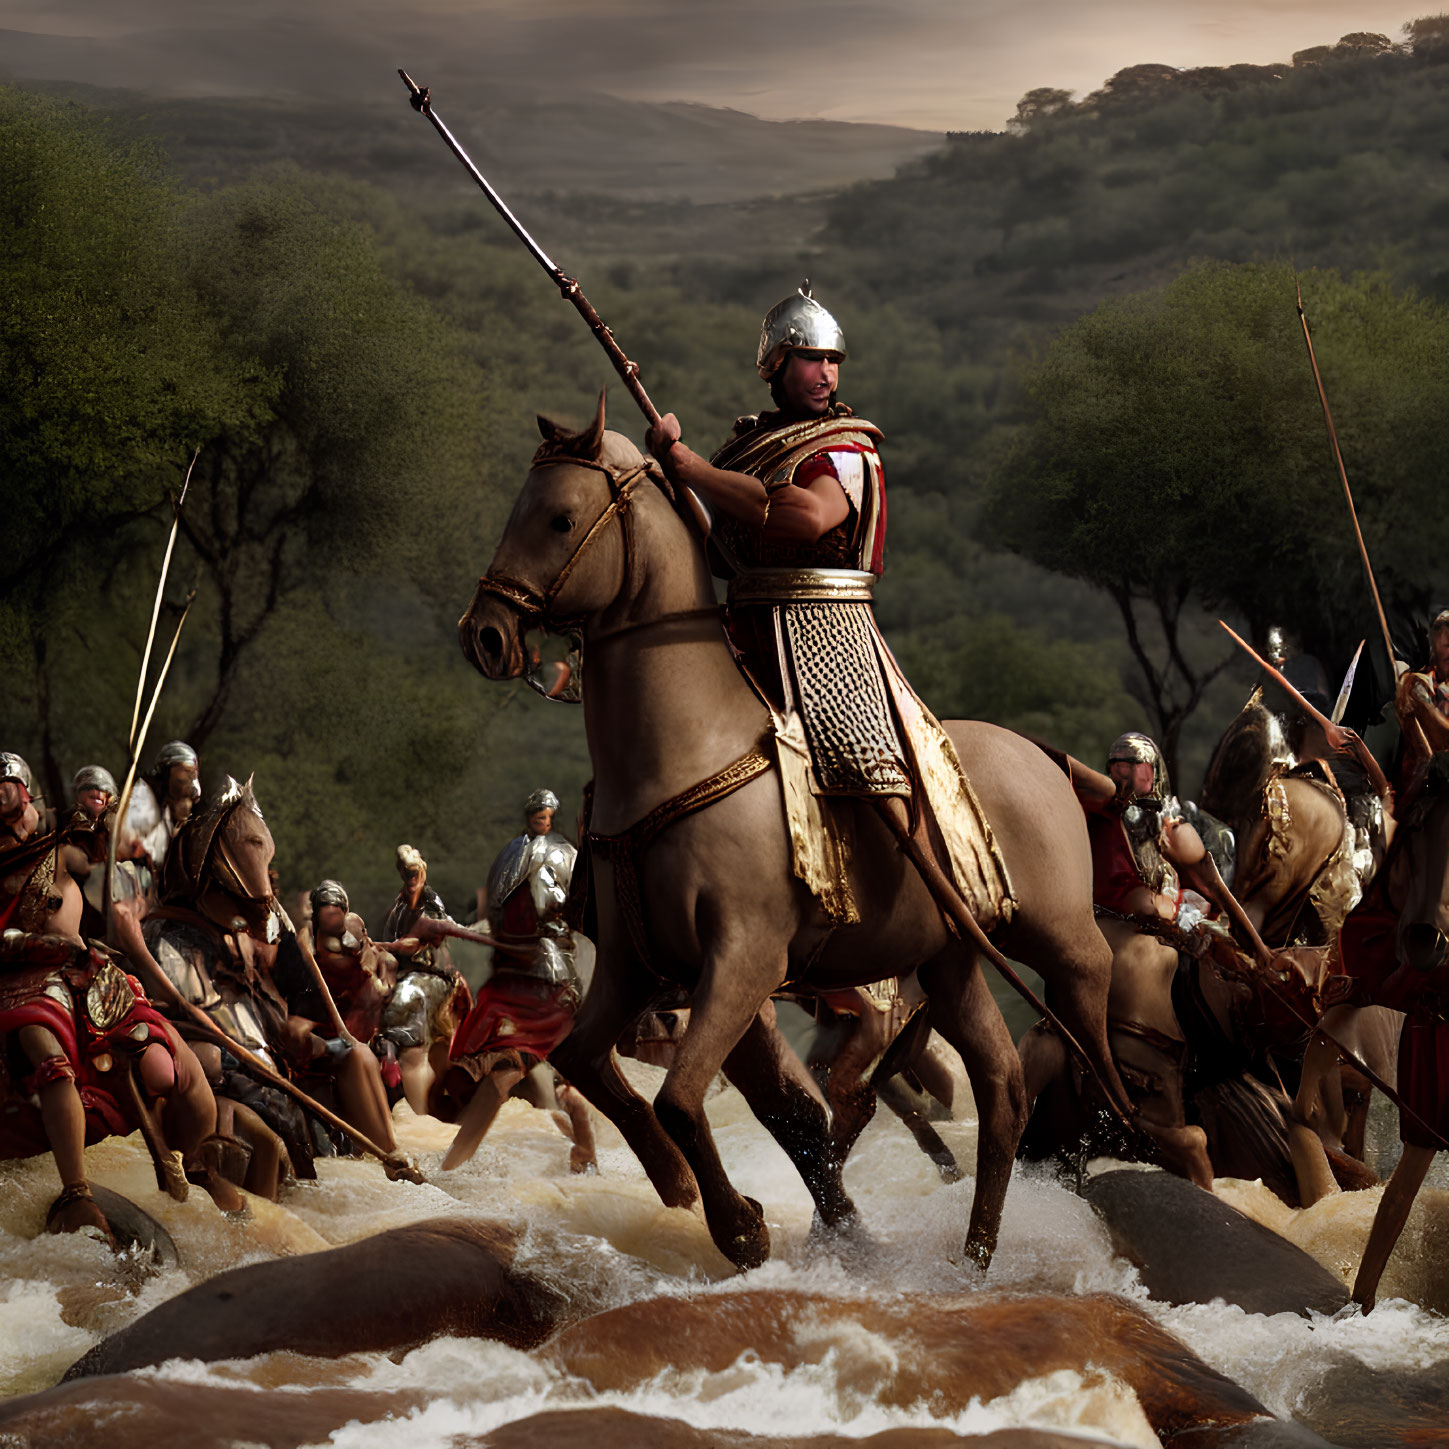 Roman leader on horseback leads soldiers crossing river with spears and shields